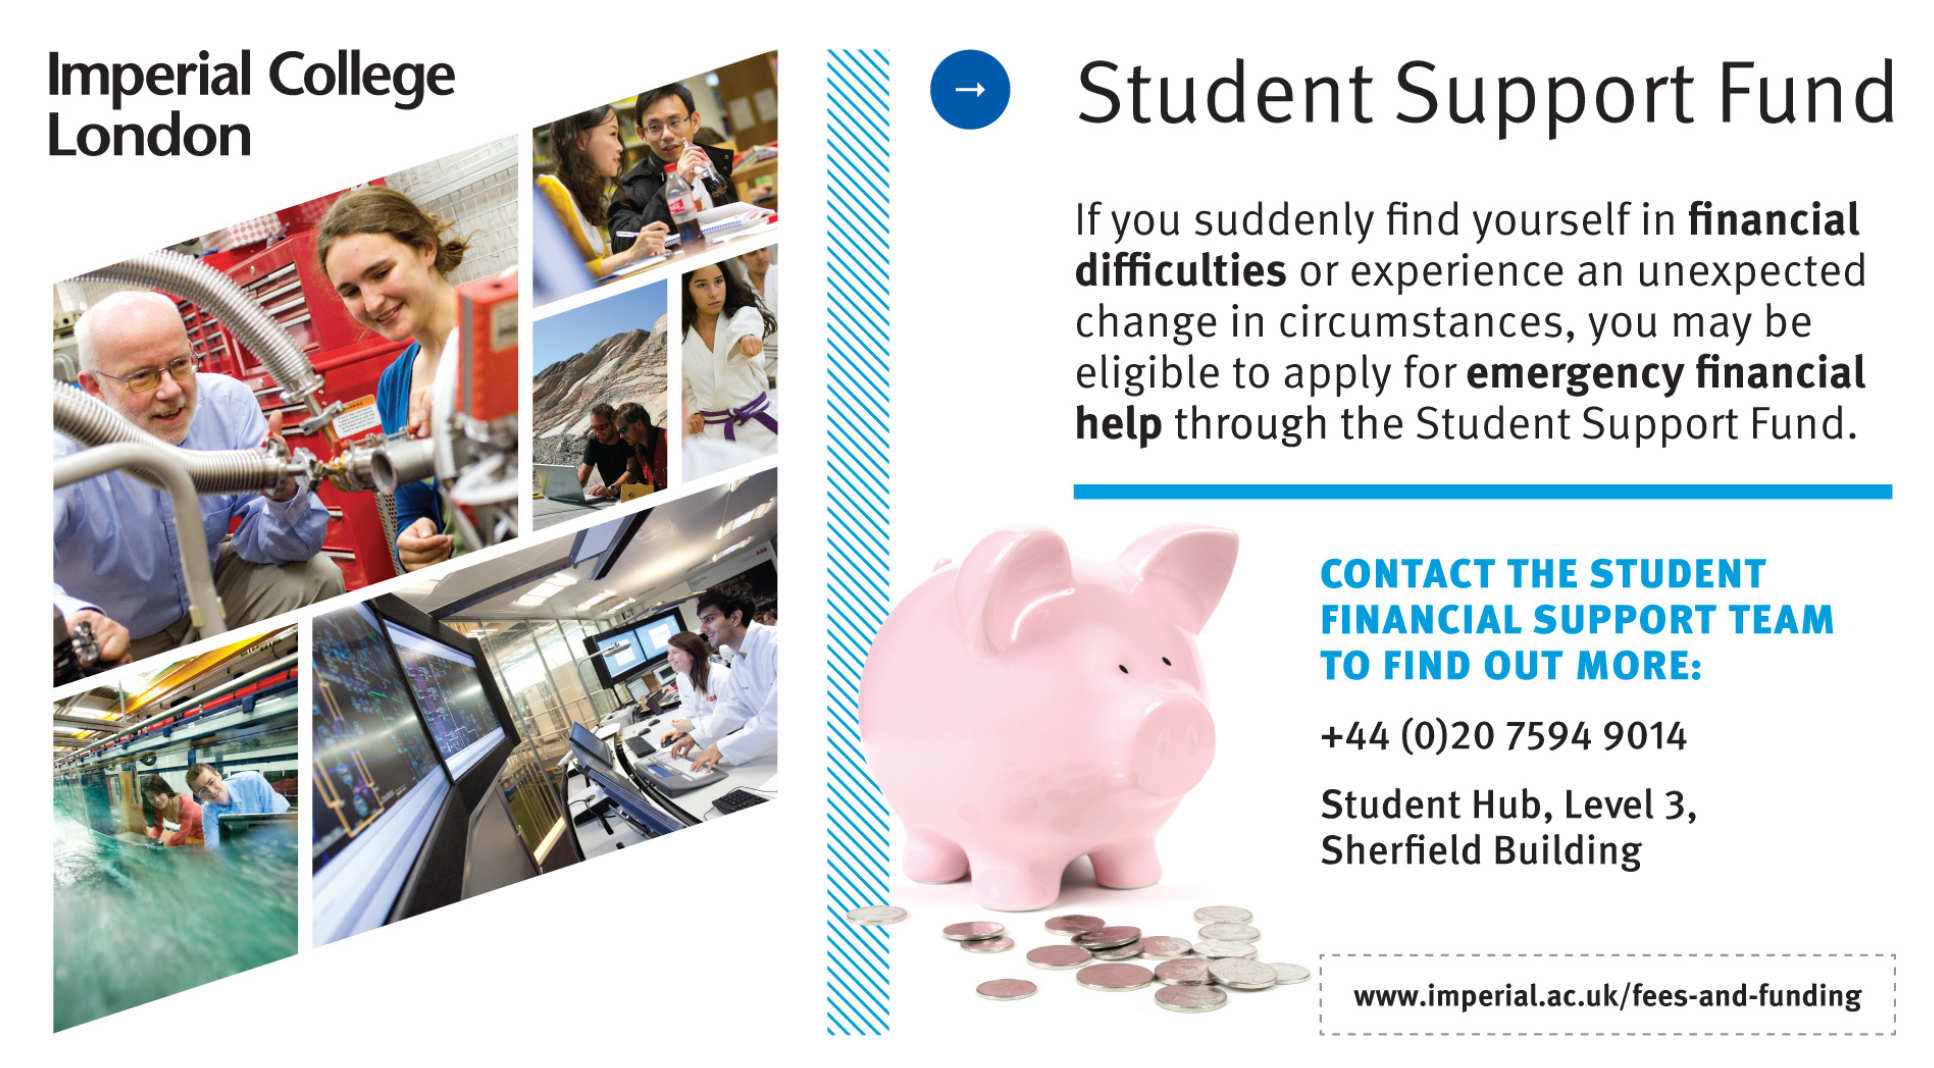 If you suddenly find yourself in financial difficulties or experience an unexpected change in circumstances, you may be eligible to apply for emergency financial help through the Student Support fund.